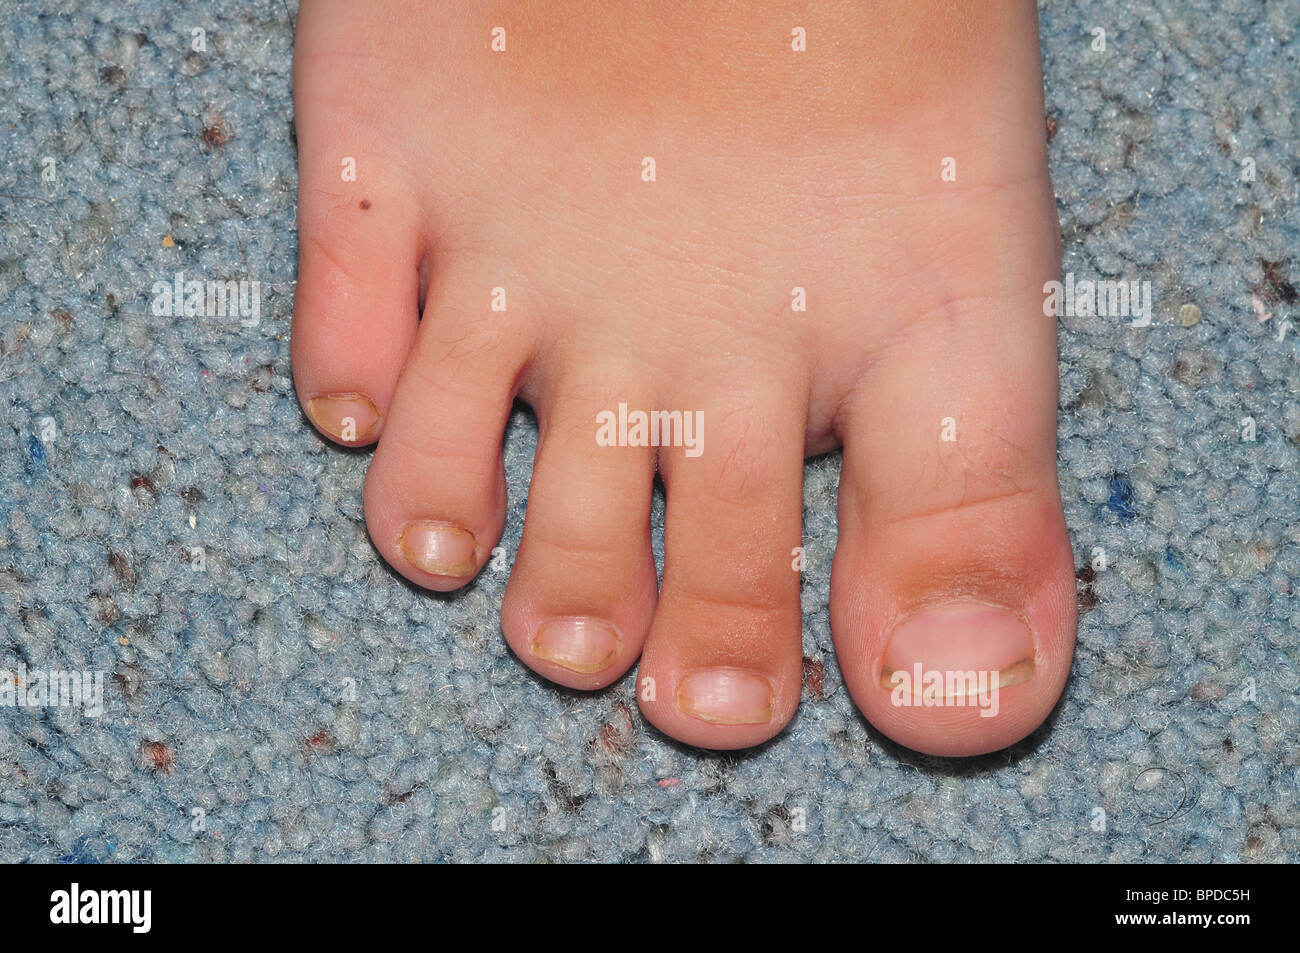 Healthy Toes Photos and Images